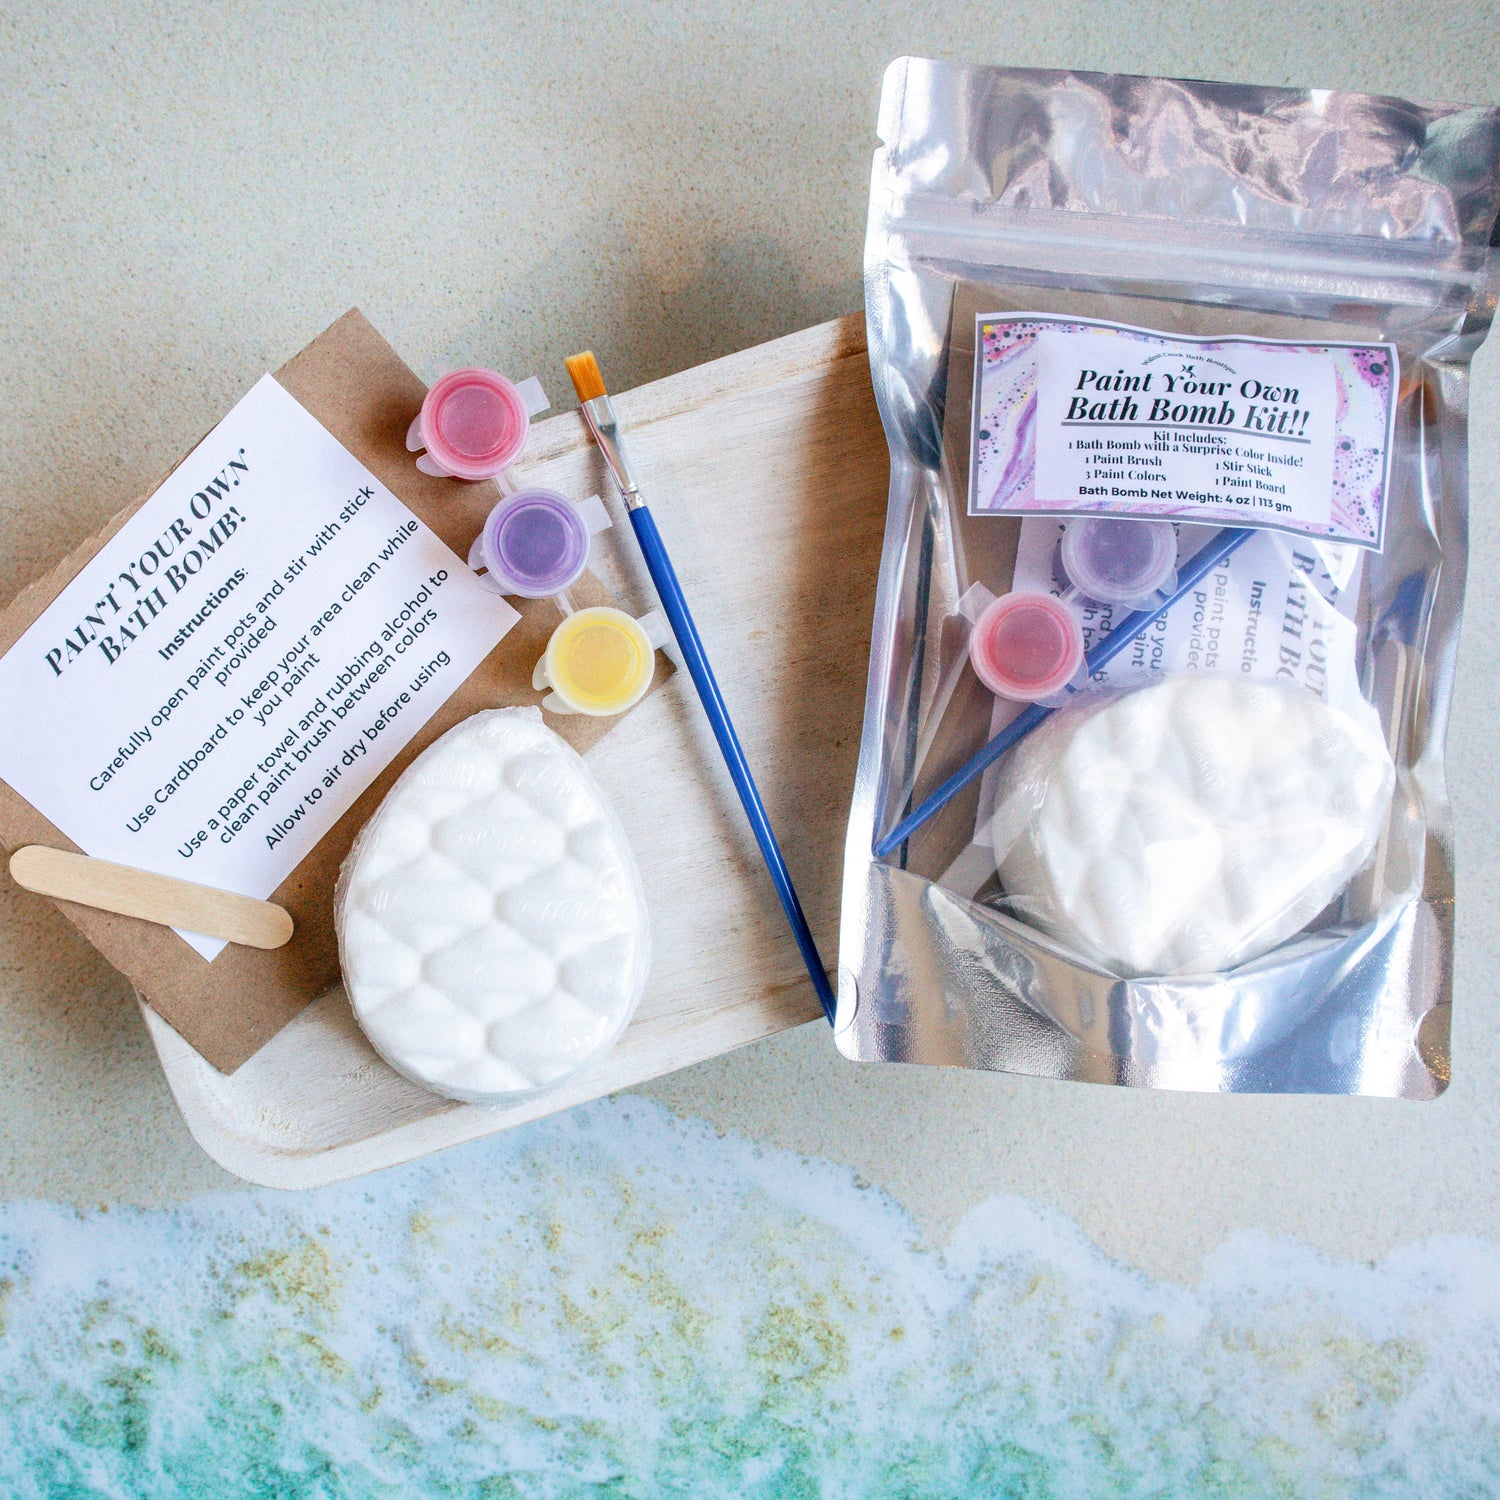 there is a bag of the dino bath bomb kit to the right of the contents splayed out.  the dino egg along with a paint brush, paint pots of red, purple and yellow skin safe colorants as the pain. they are sitting on a piece of cardboard along with the instruction sheet and a stir stick.there is an image of waves crashing on the bottom of the frame.